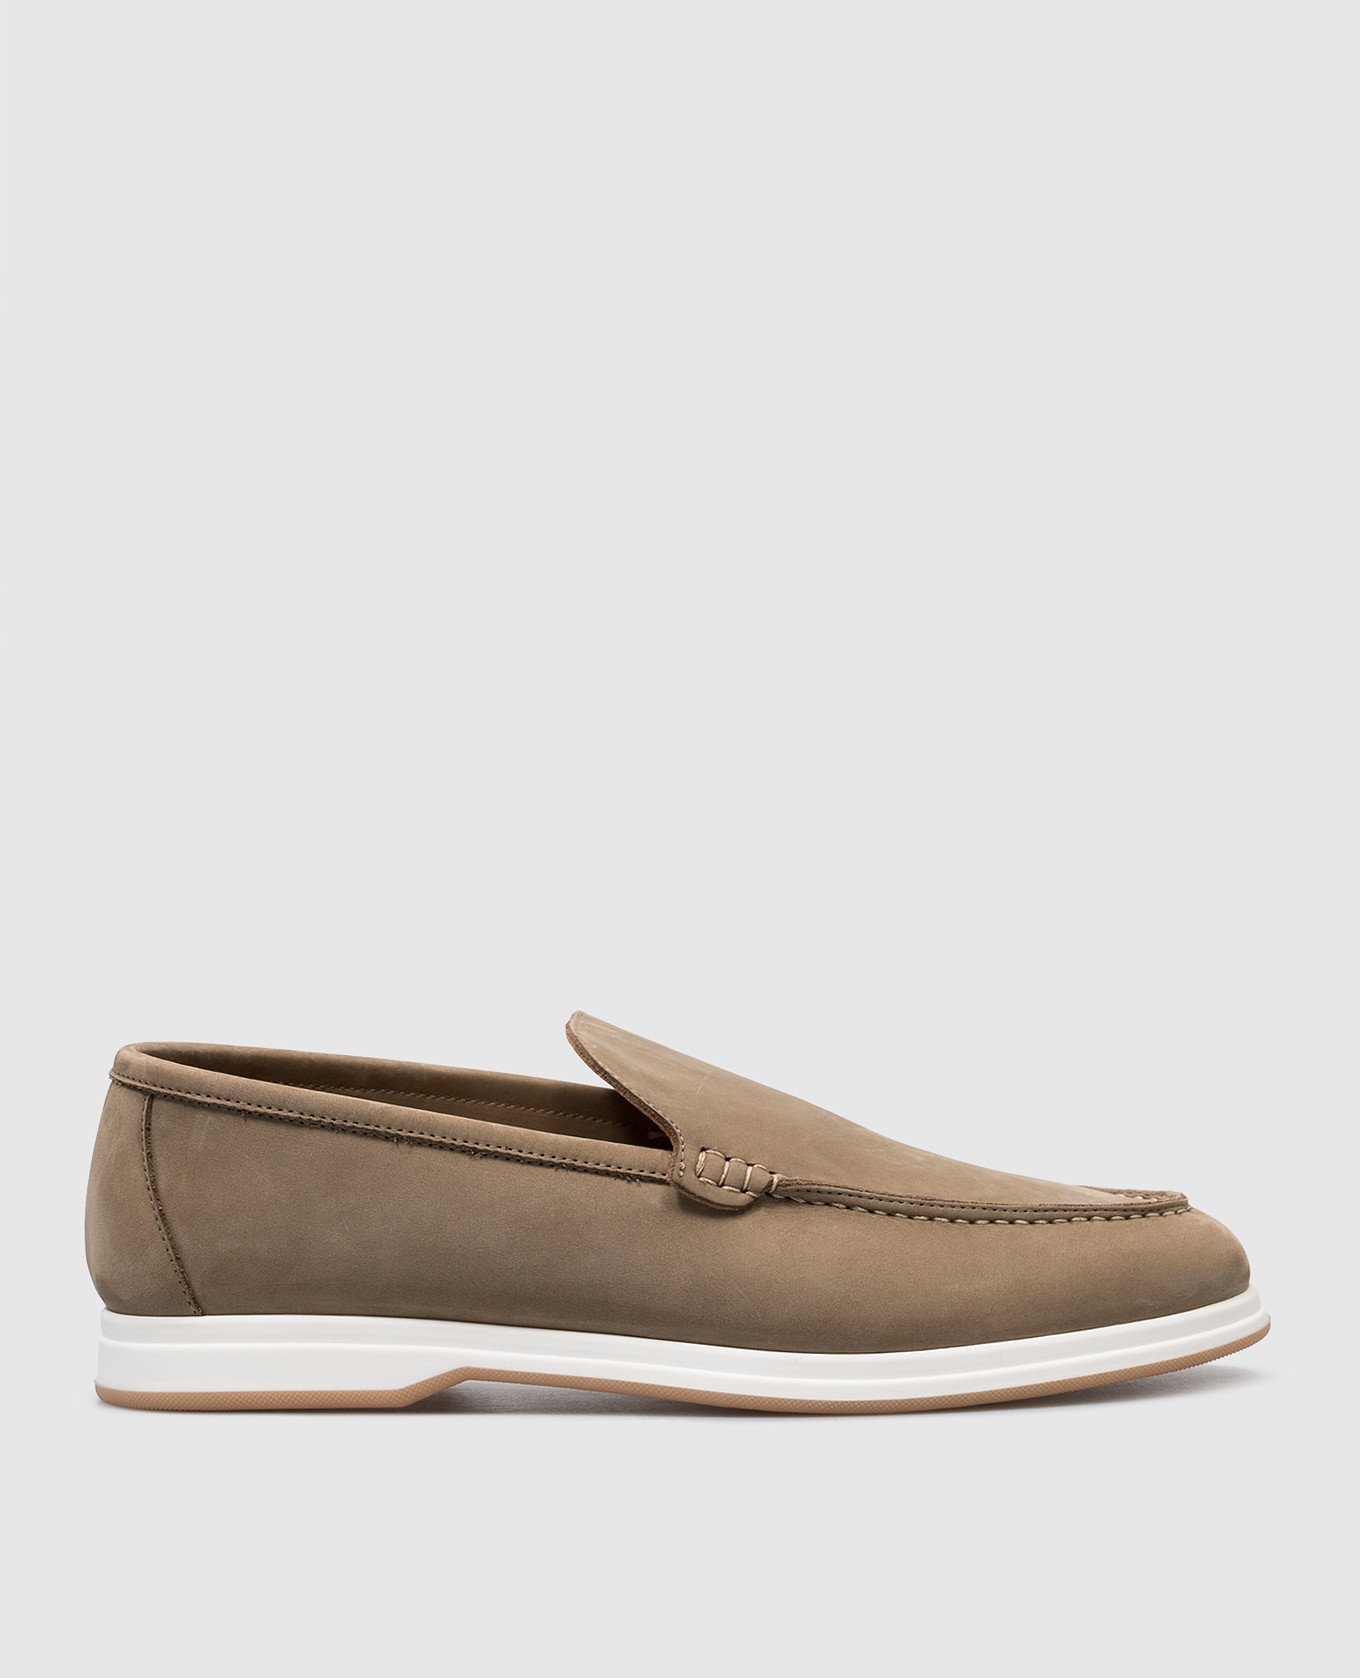 Beige suede loafers